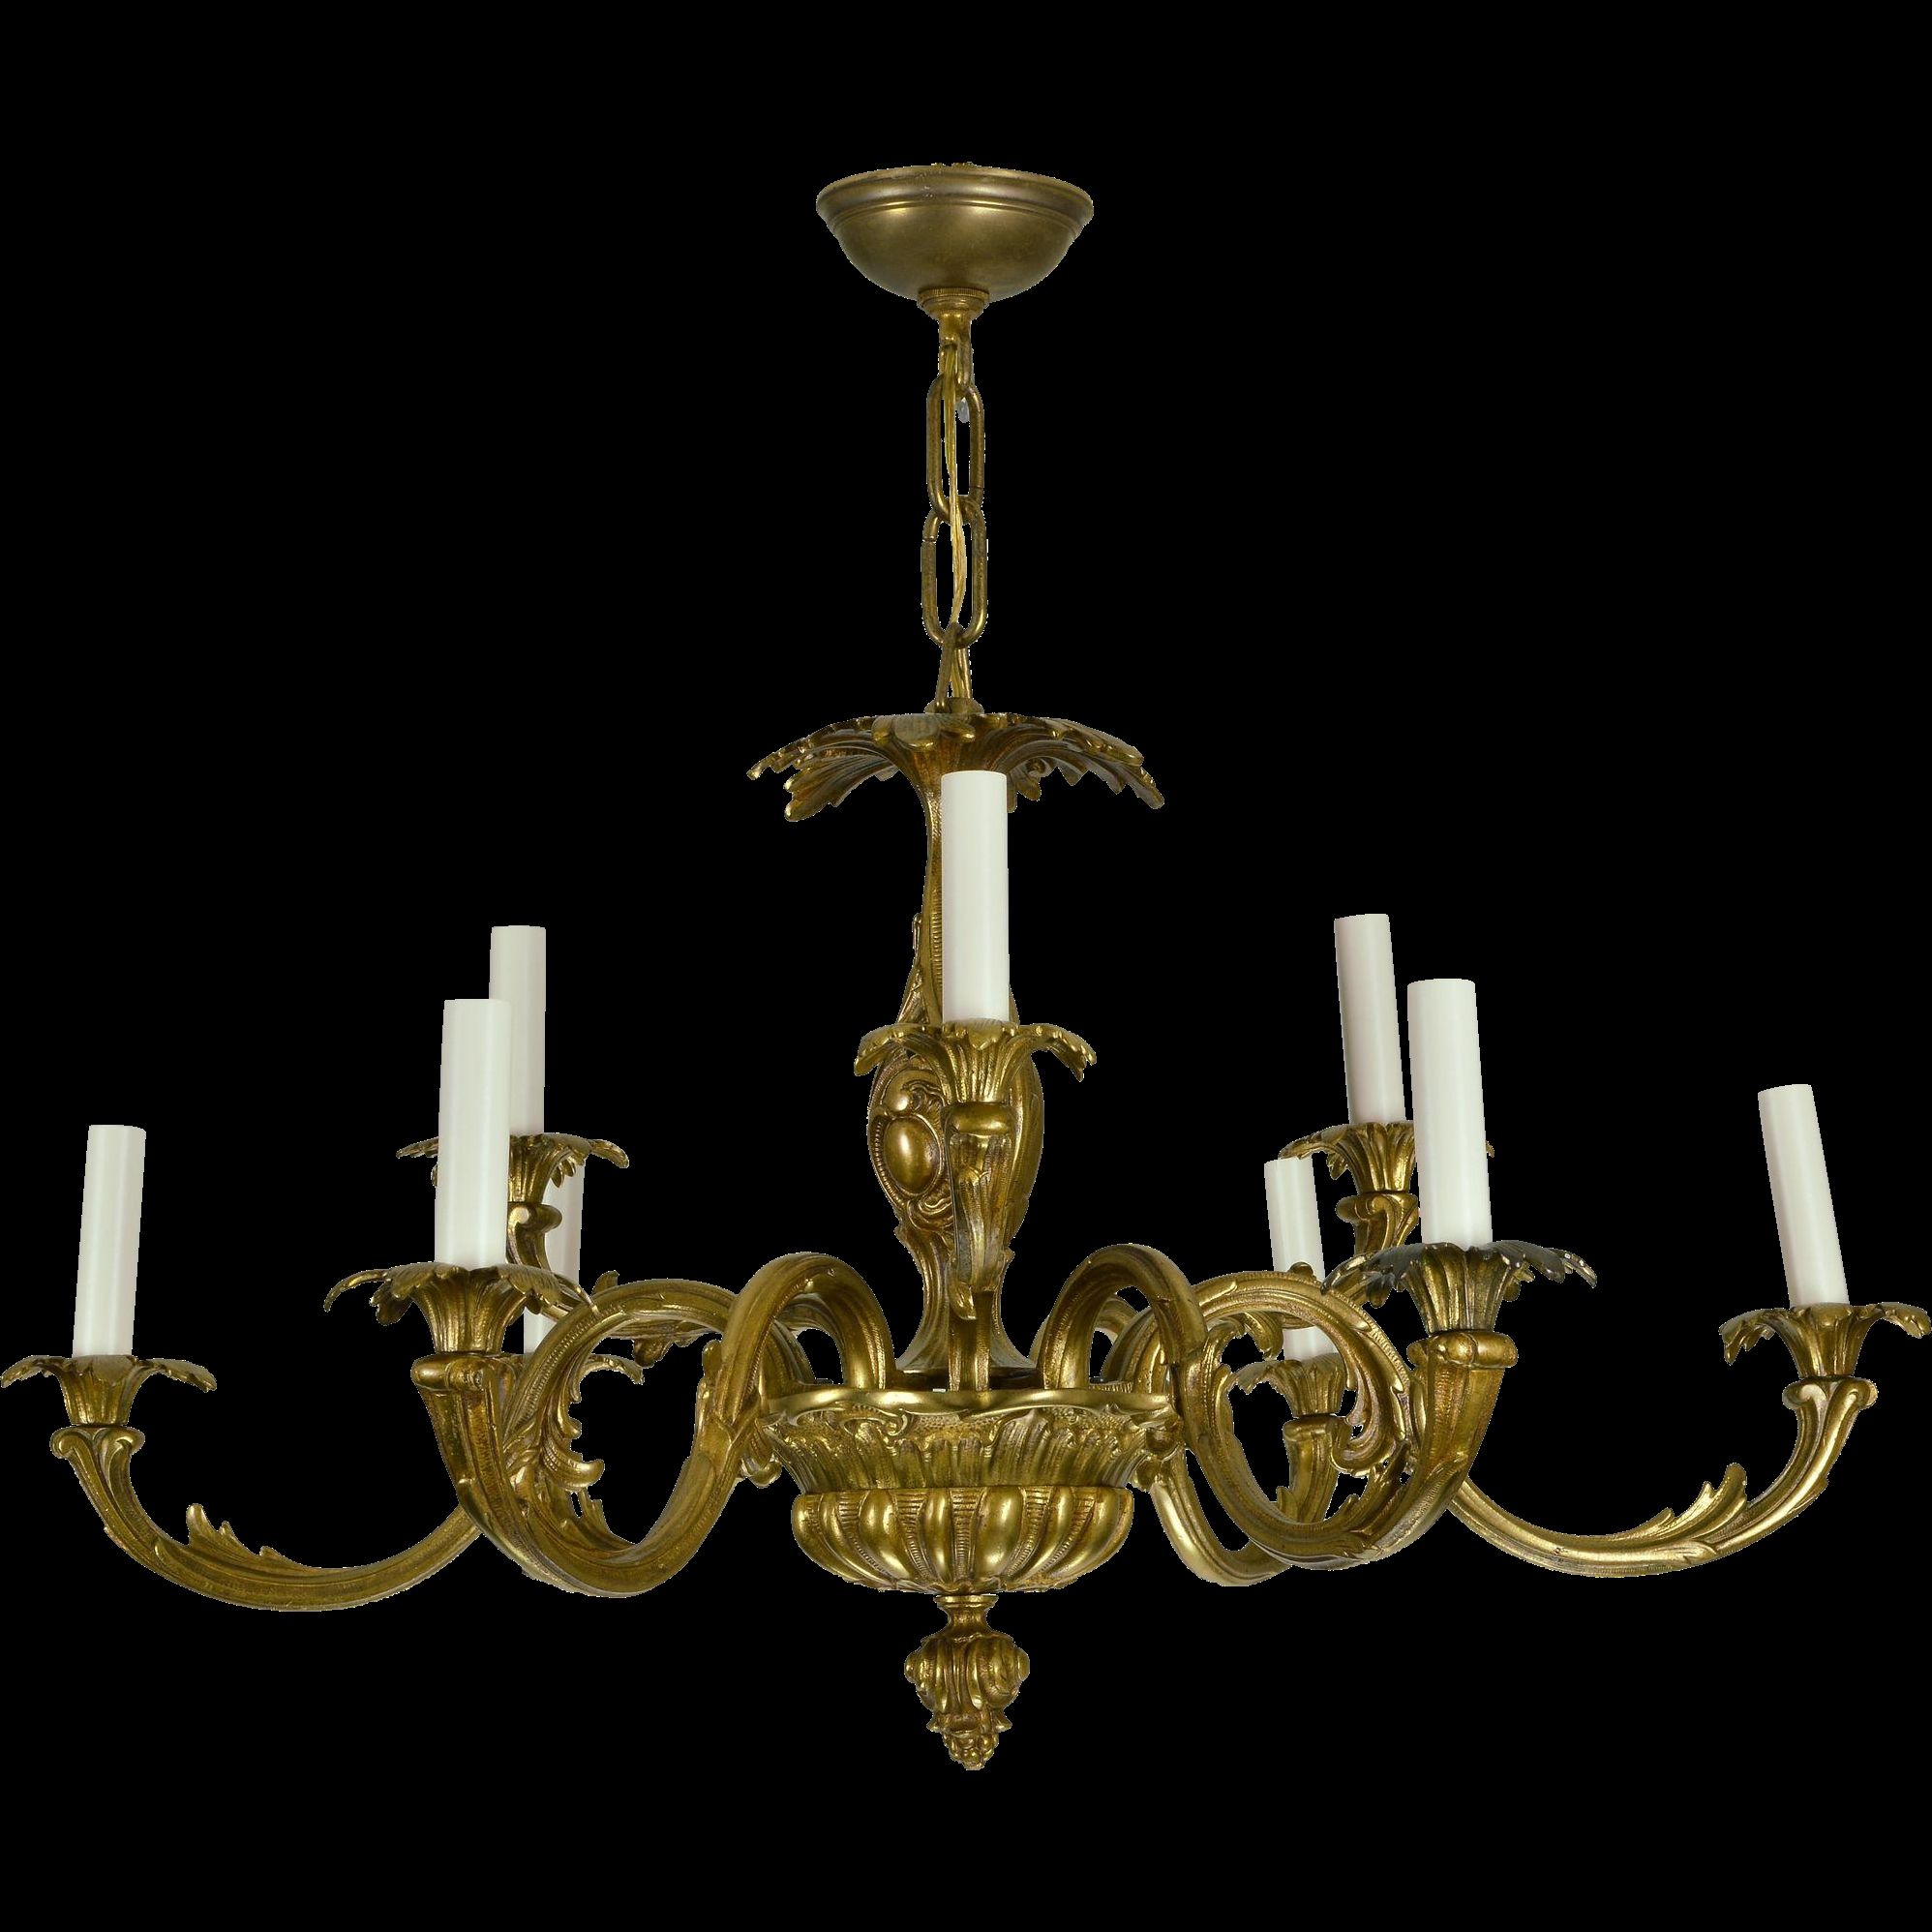 Free Shipping Modern Vintage Rh Chandelier Crystal Flush Ceiling Within Old Brass Chandeliers (View 4 of 25)